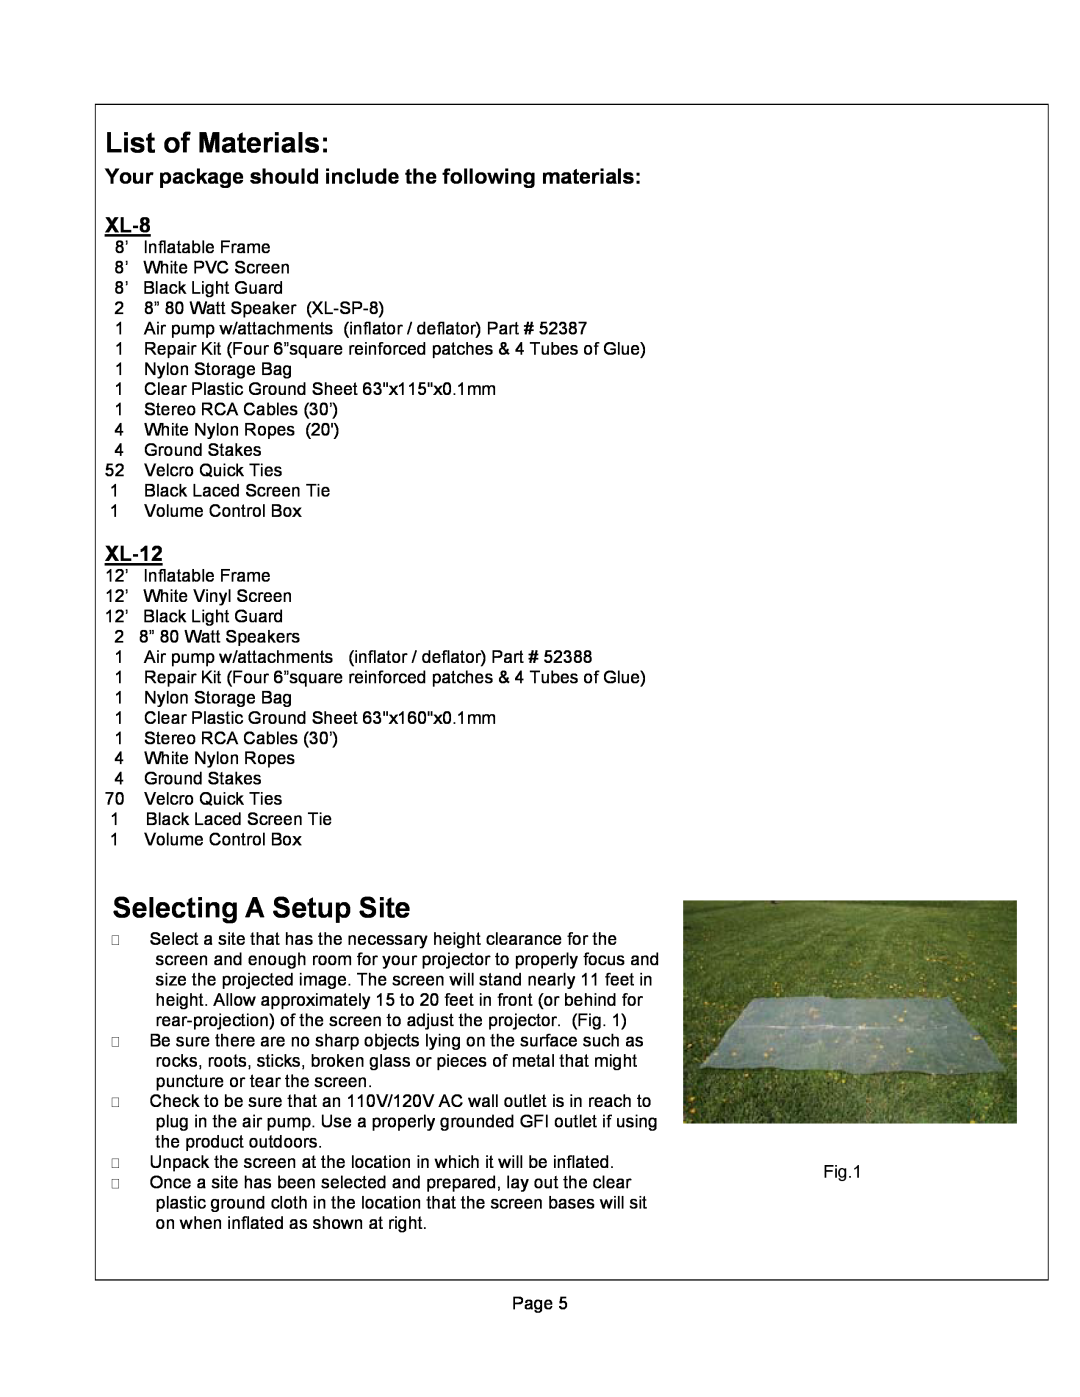 Sima Products XL-8 user manual List of Materials, Selecting A Setup Site, XL-12 